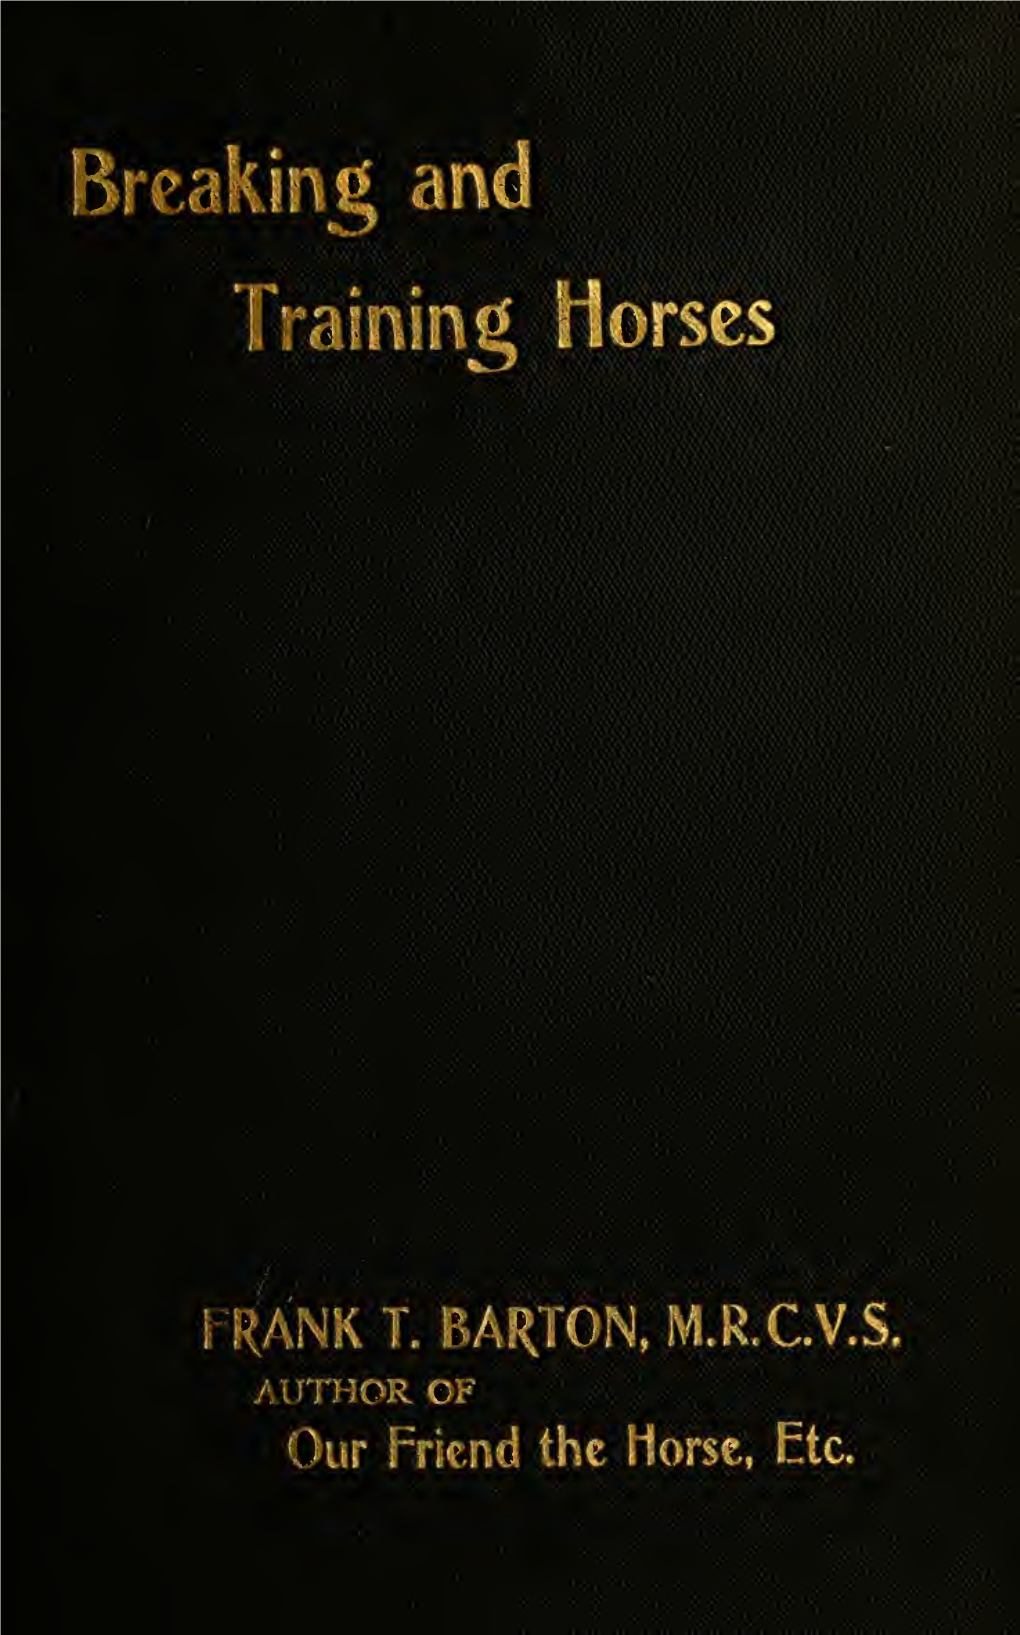 Breaking and Training Horses